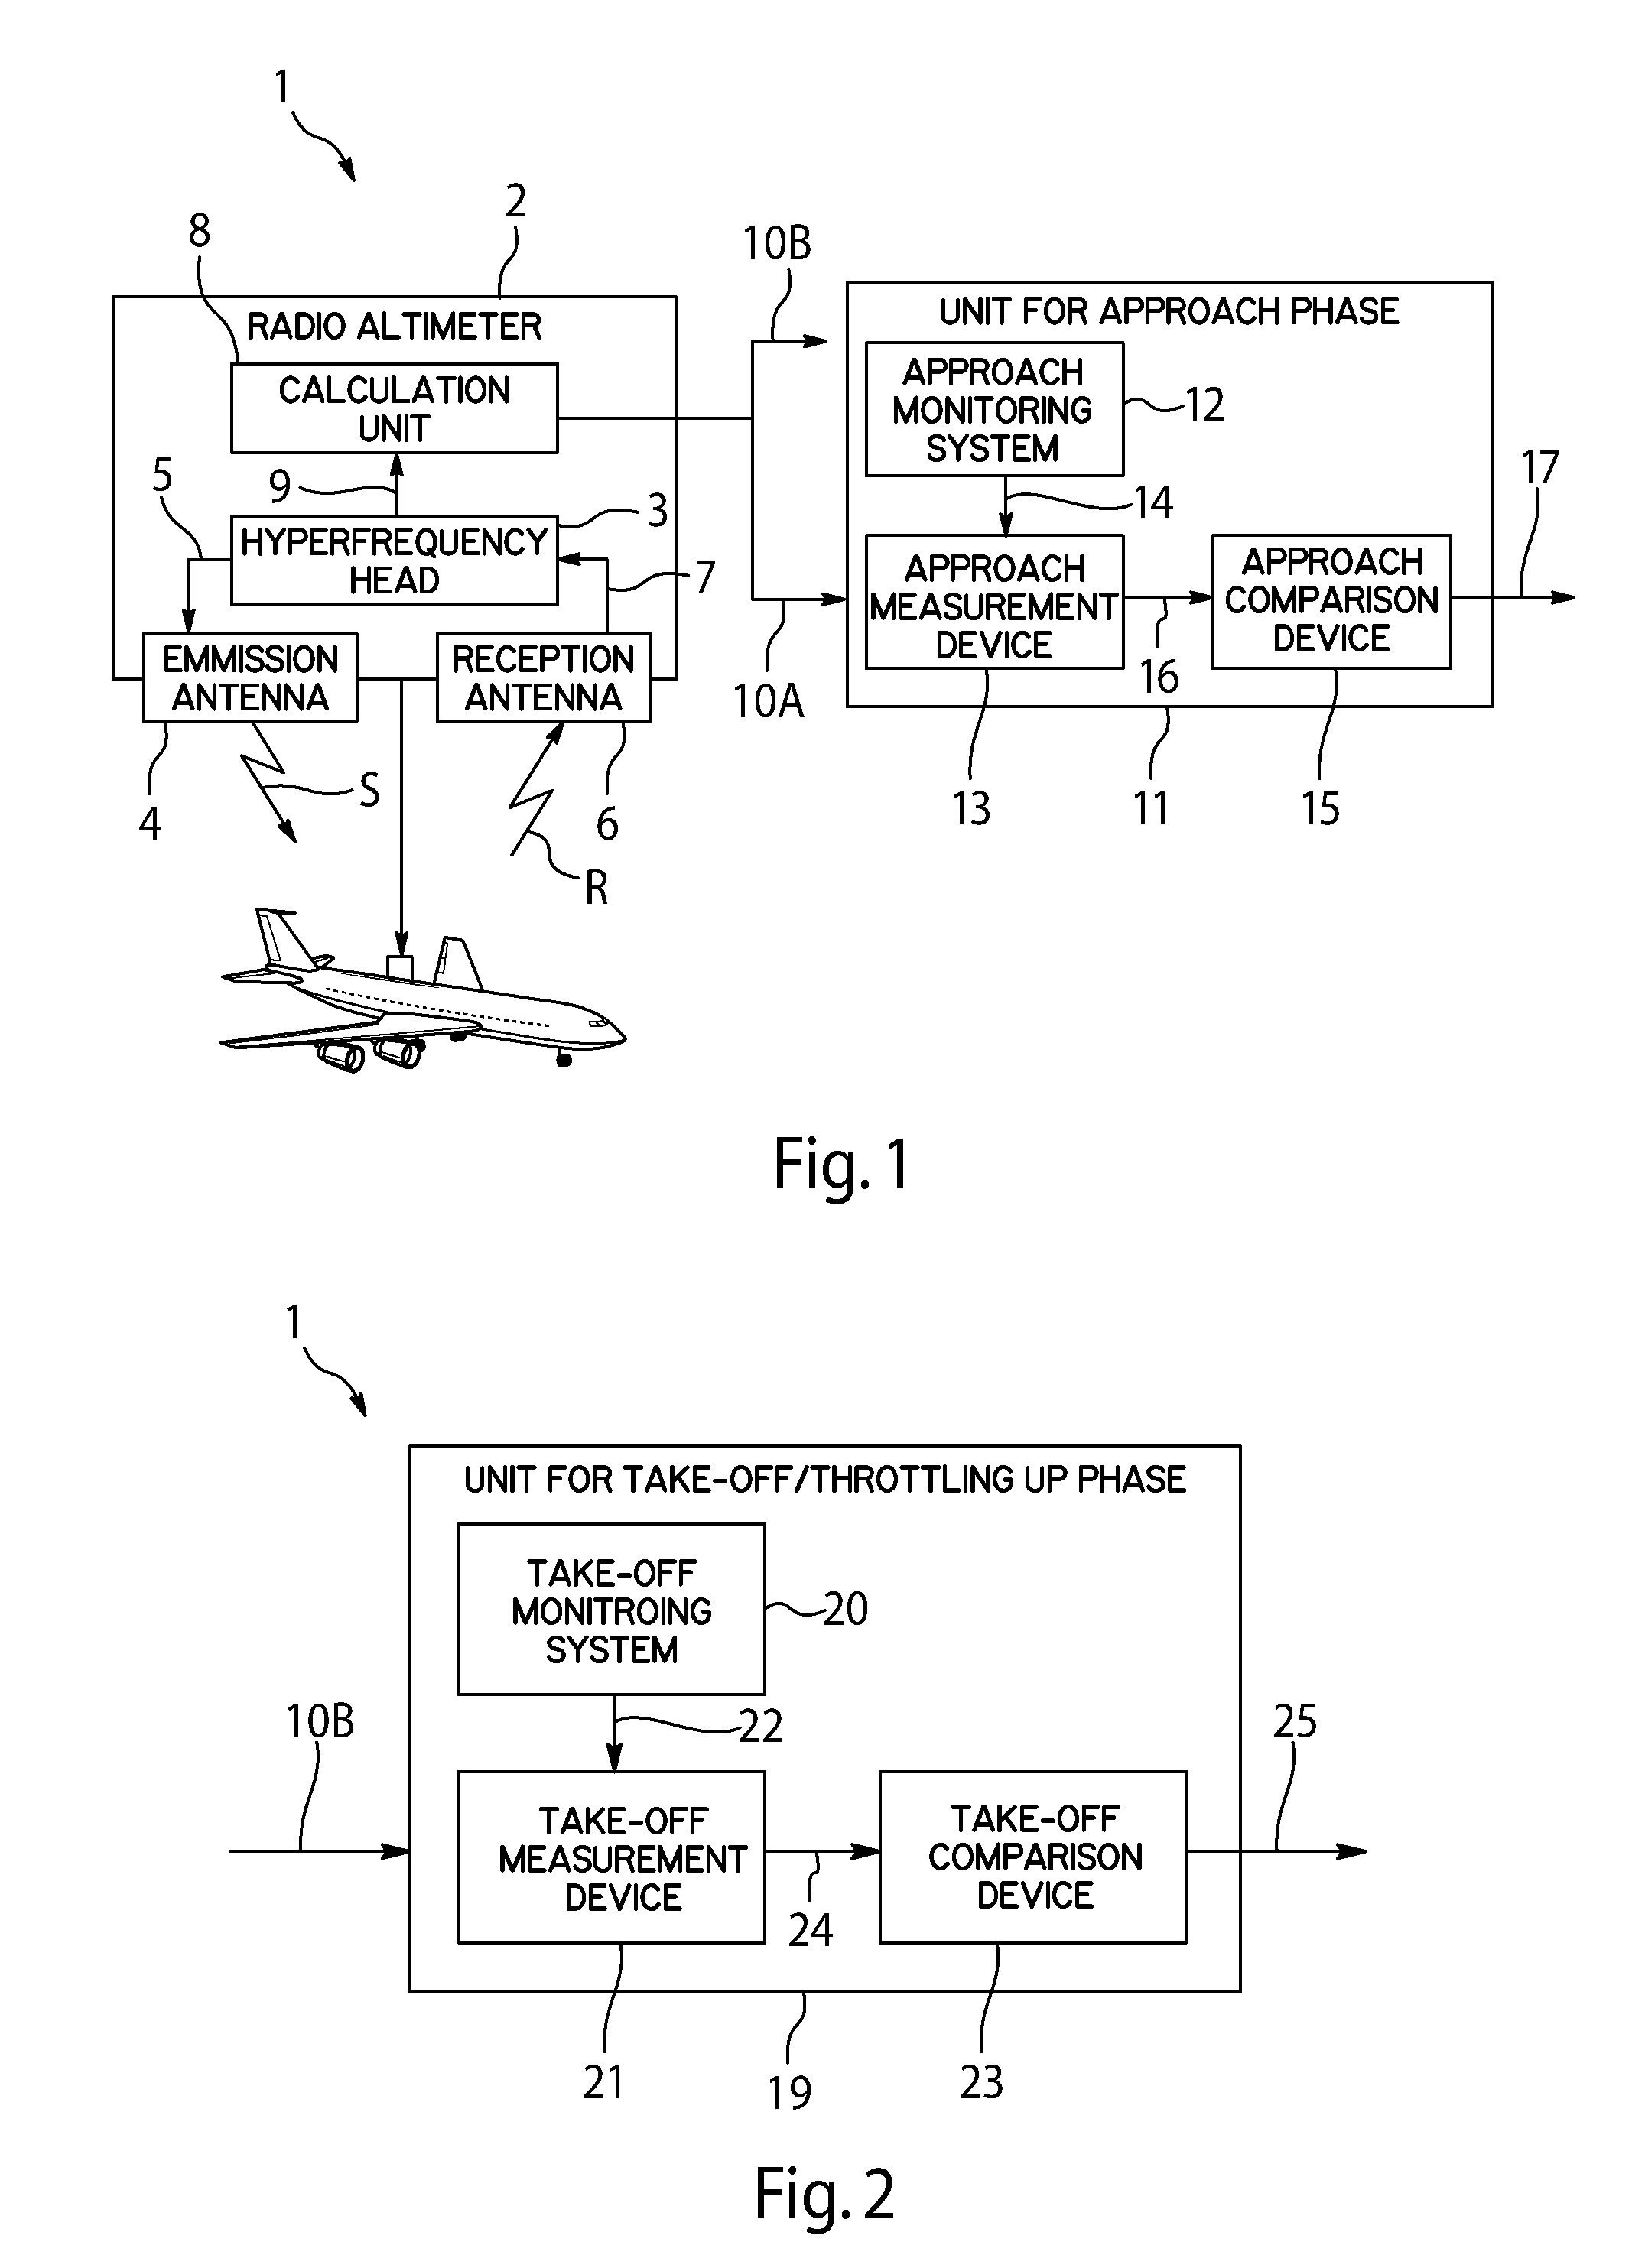 Method and device for automatically determining an erroneous height value of a radioaltimeter mounted on an aircraft